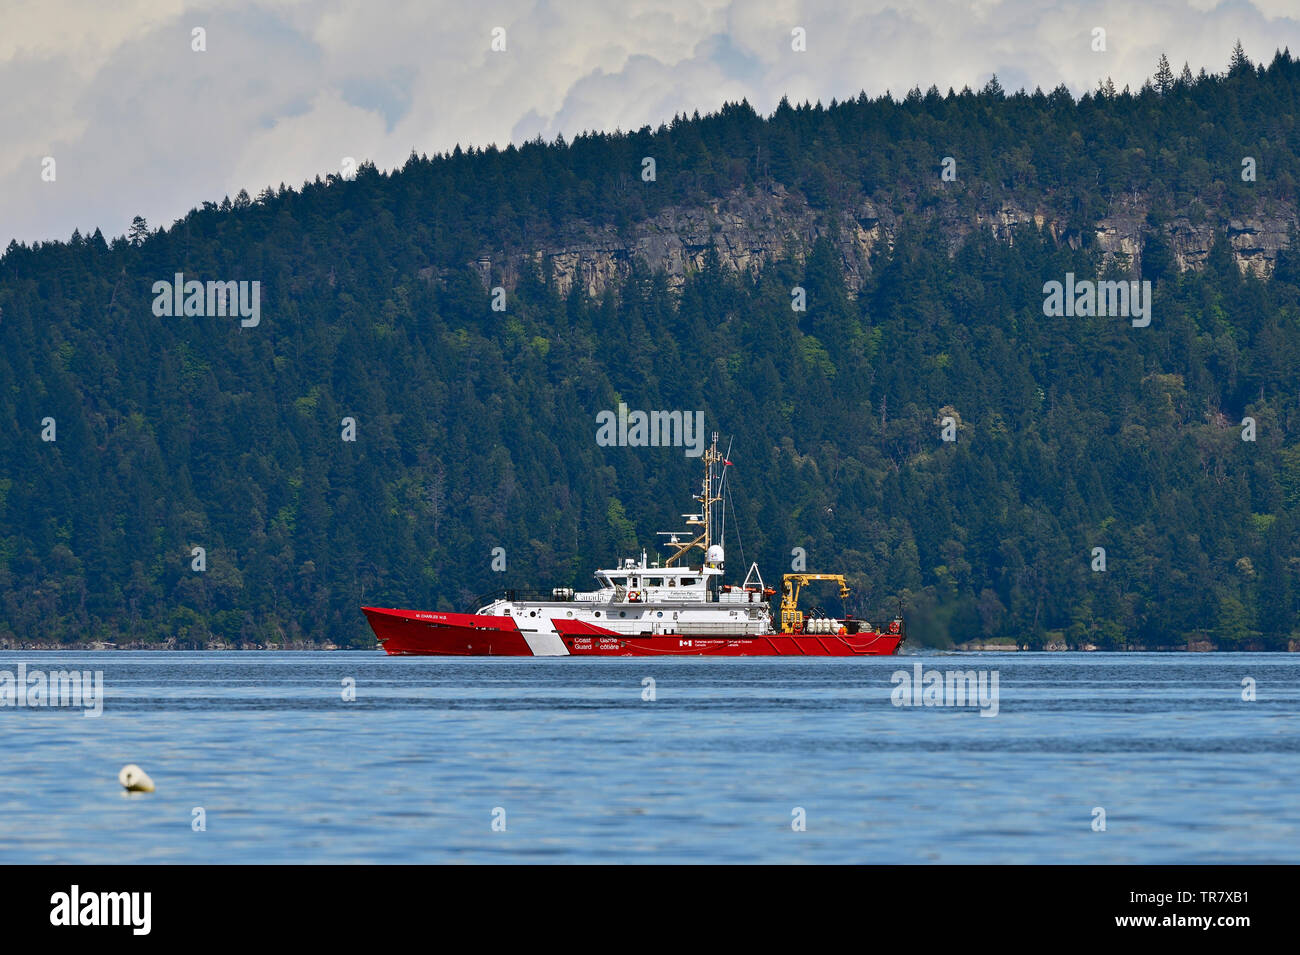 A Canadian Coast Guard fisheries patrol vessel traveling on the waters of The Strait of Georgia near Vancouver Island British Columbia Canada. Stock Photo